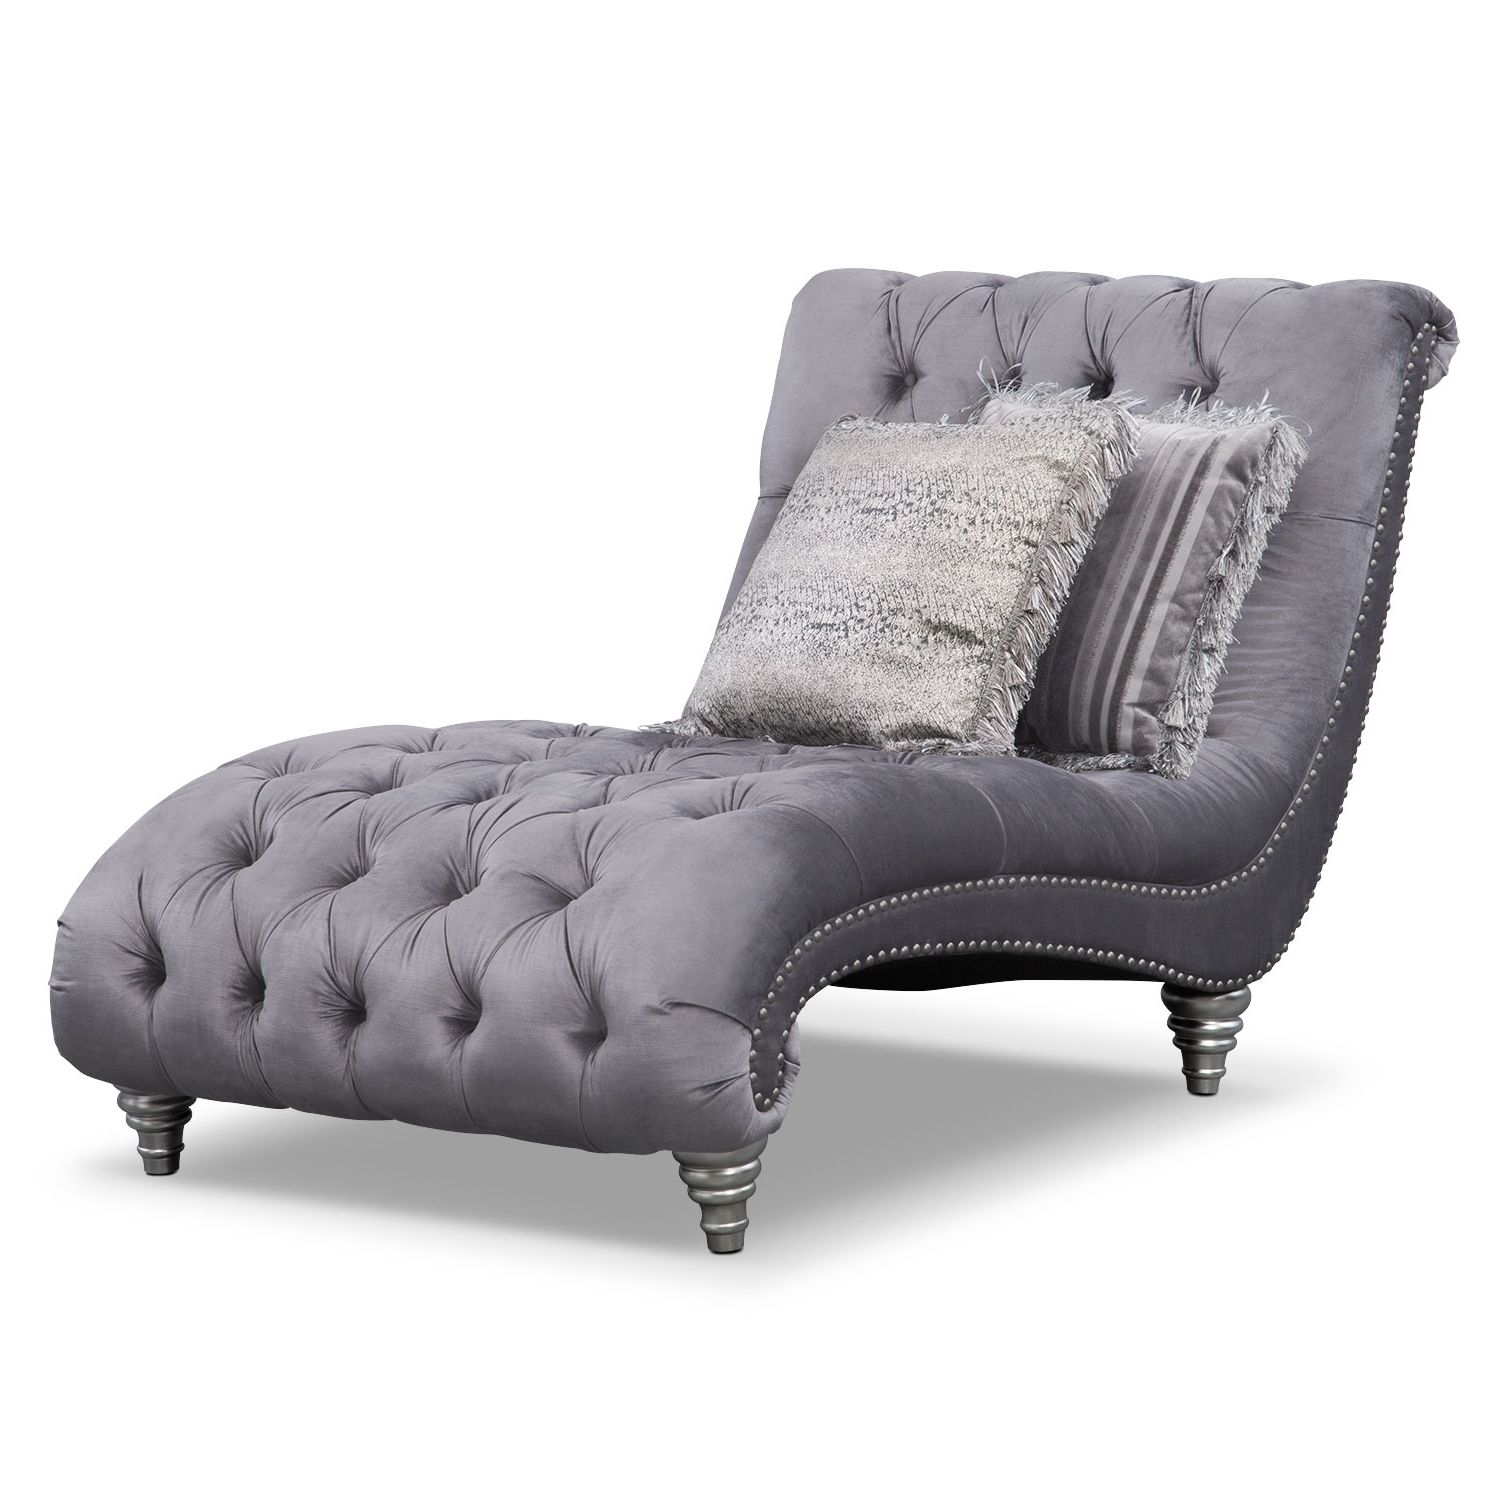 Elegant Chaise Lounge Chairs With Popular Gray Chaise Lounge Chair • Lounge Chairs Ideas (View 11 of 15)